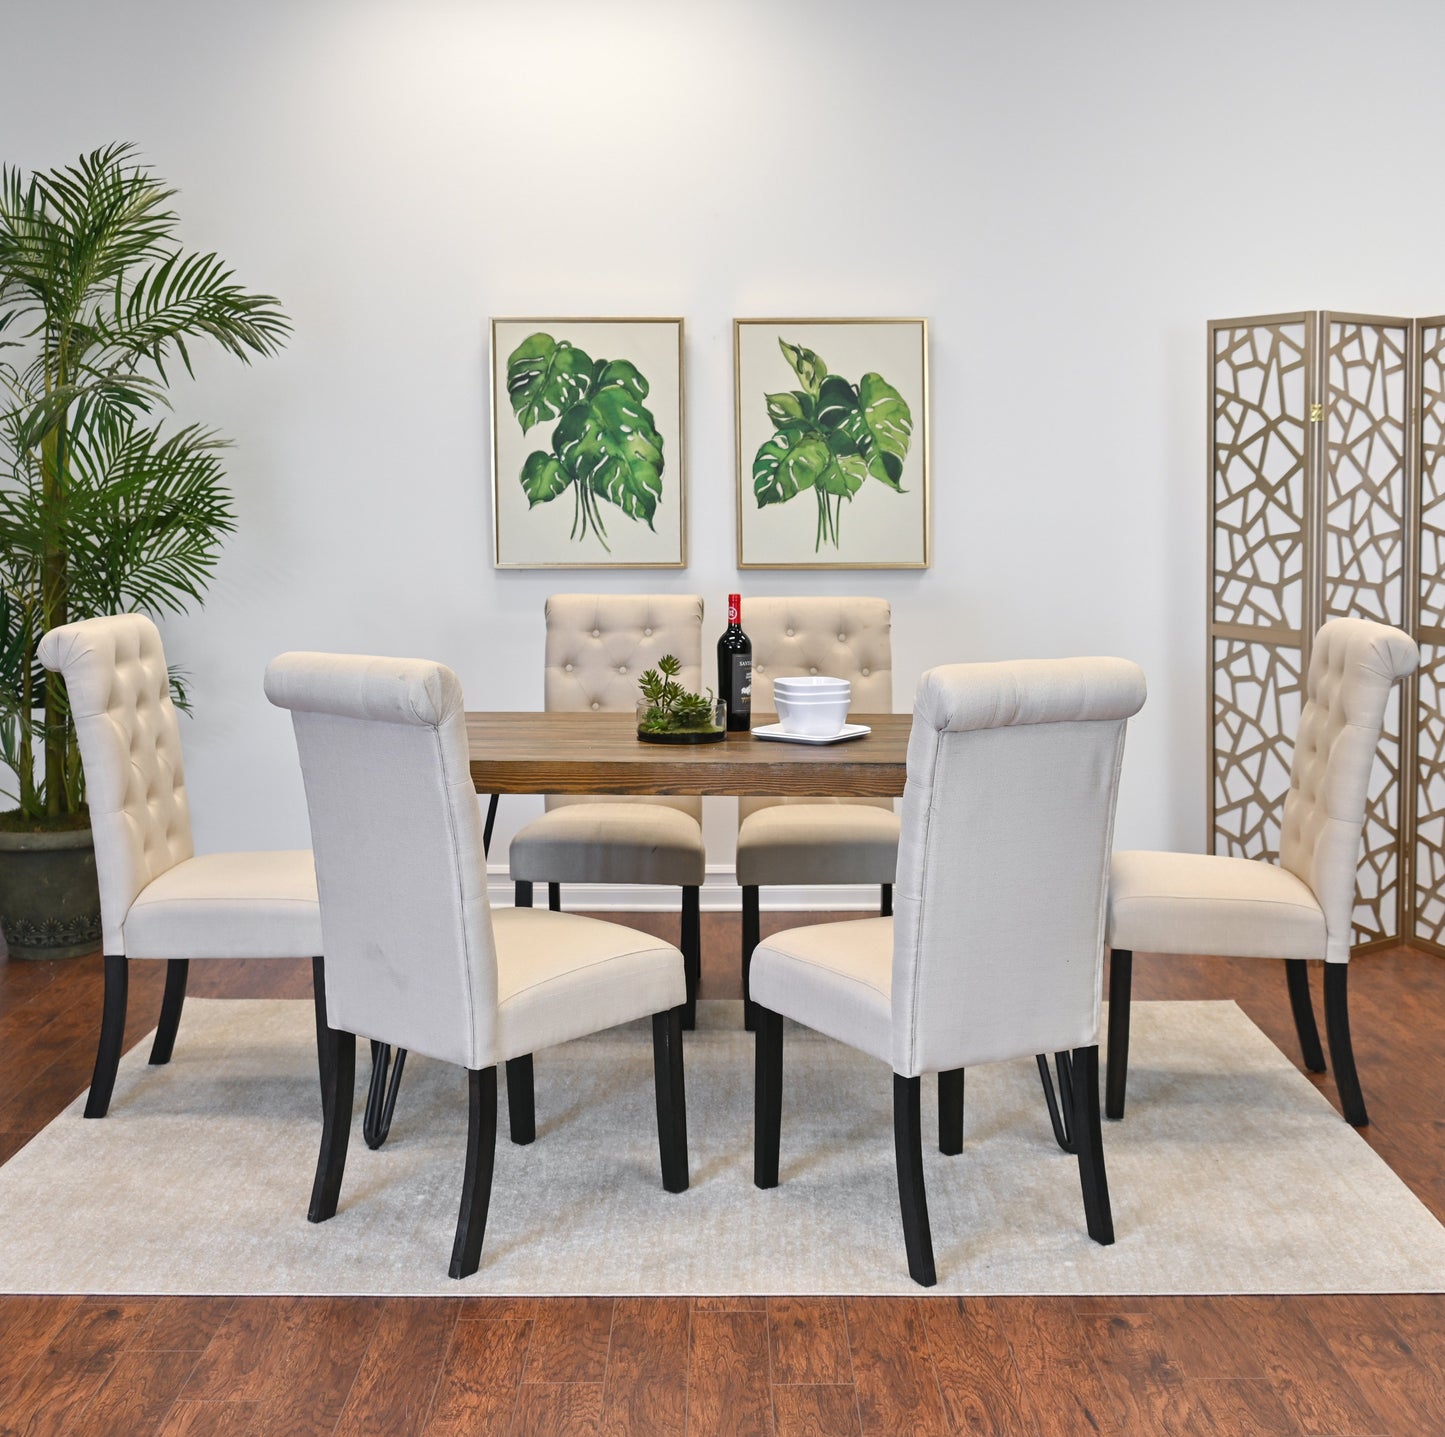 Ashford 7-Piece Dining Set, Hairpin Dining Table with 6 Chairs, 4 Color Options